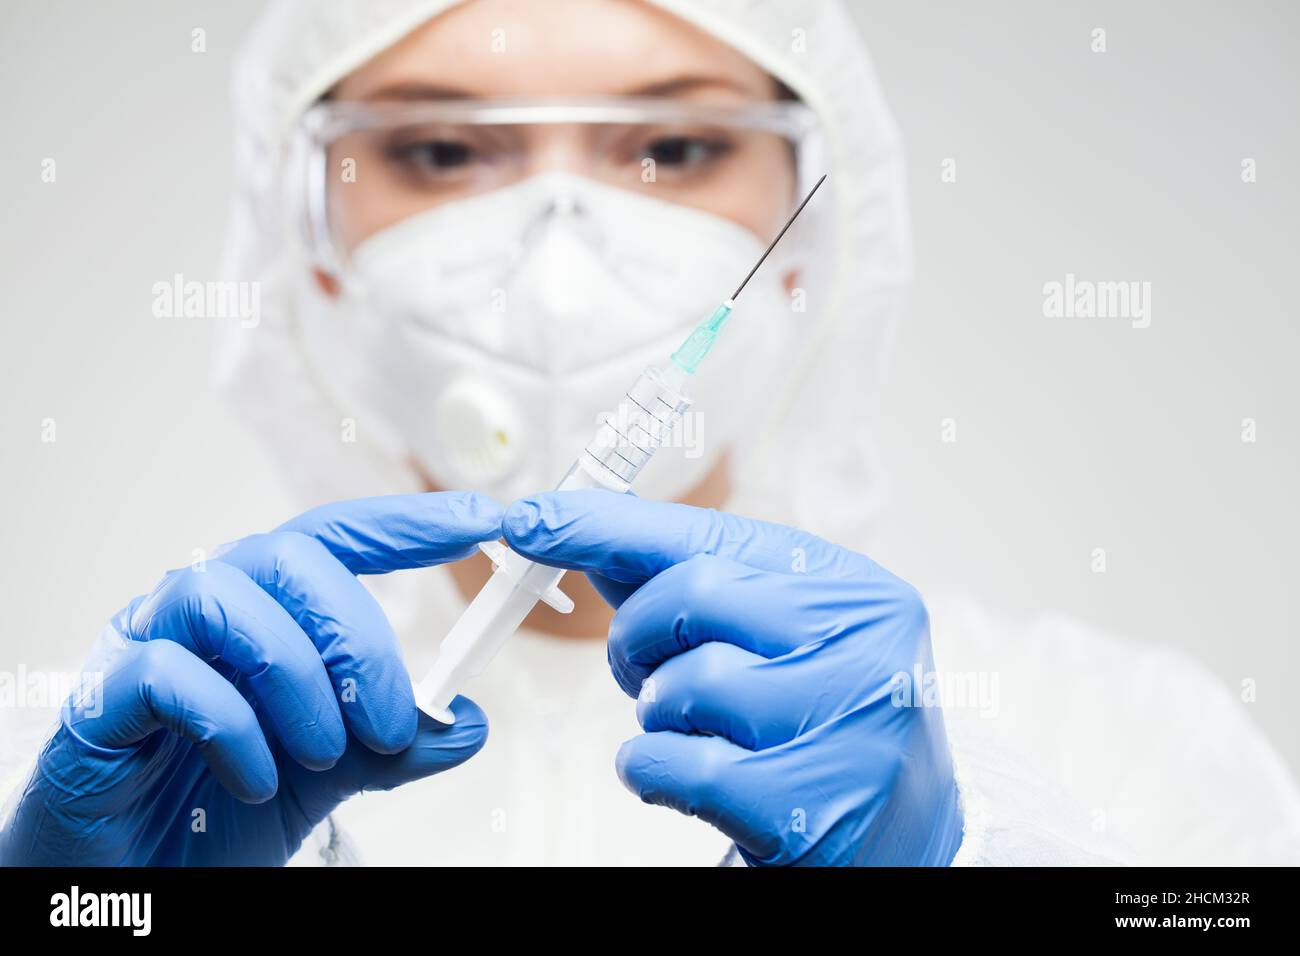 Female medical NHS worker wearing protective suit,goggles,face mask and gloves,holding syringe with needle containing vaccination booster dose Stock Photo